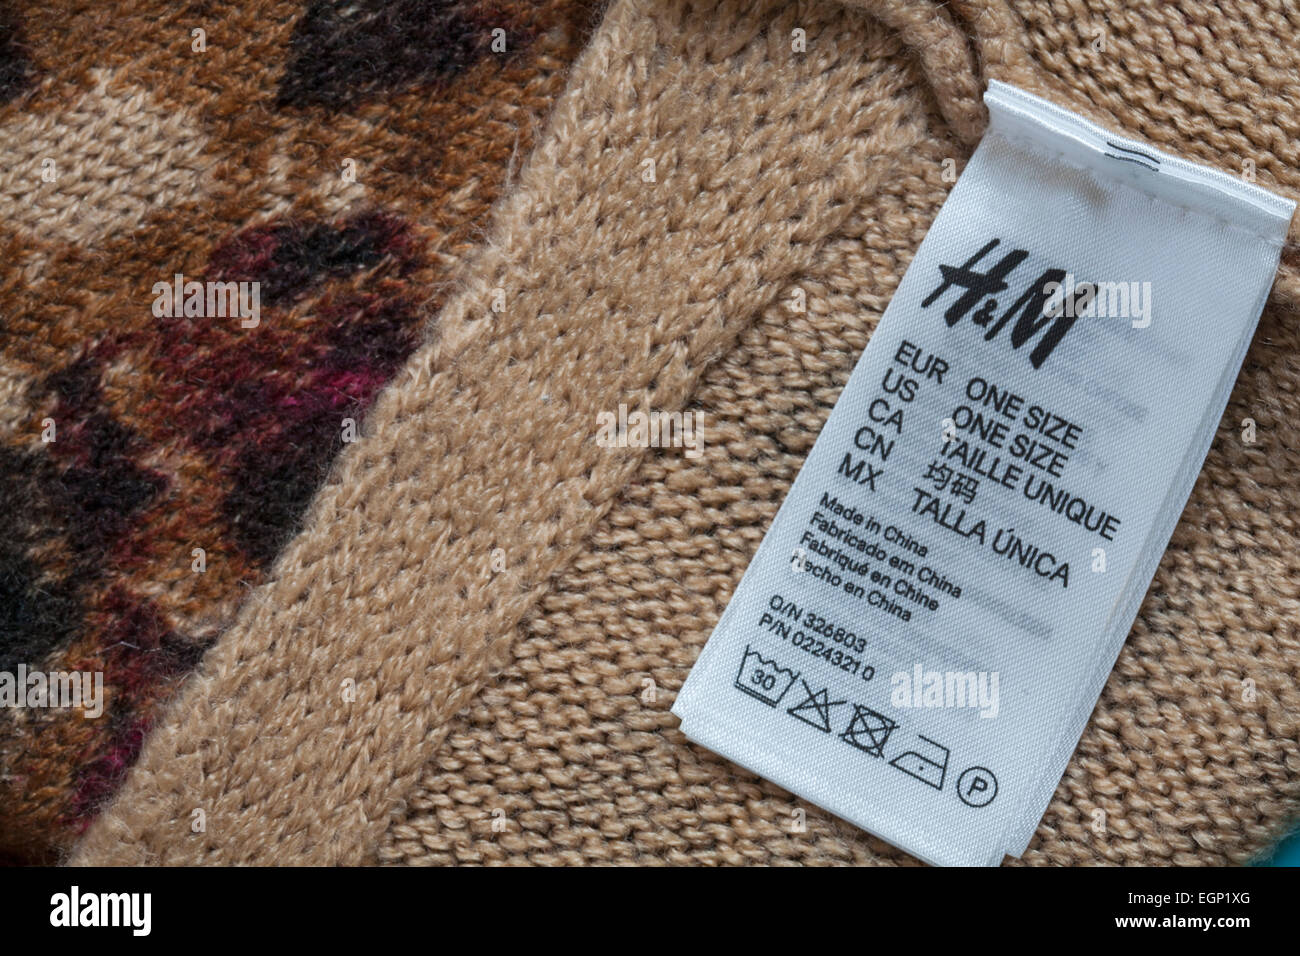 Made In China Label In Clothing High Resolution Stock Photography and  Images - Alamy